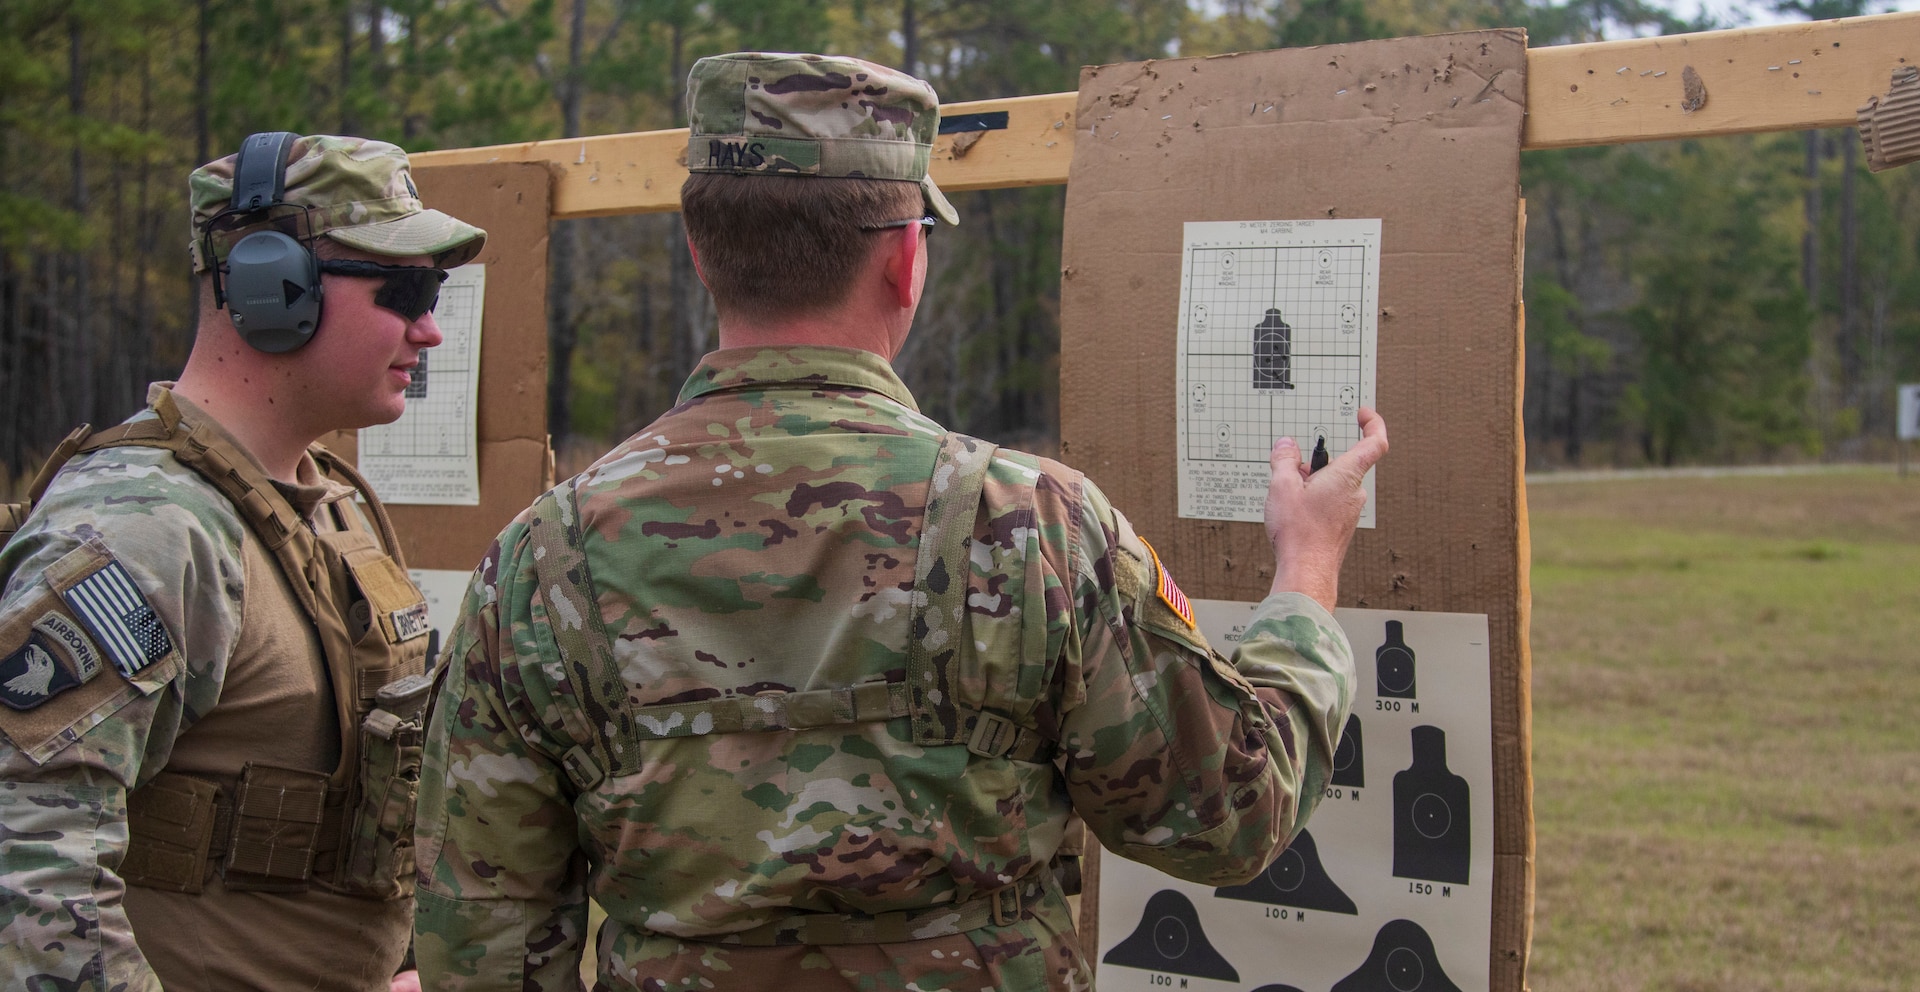 Soldiers look at shot groupings on targets during training.